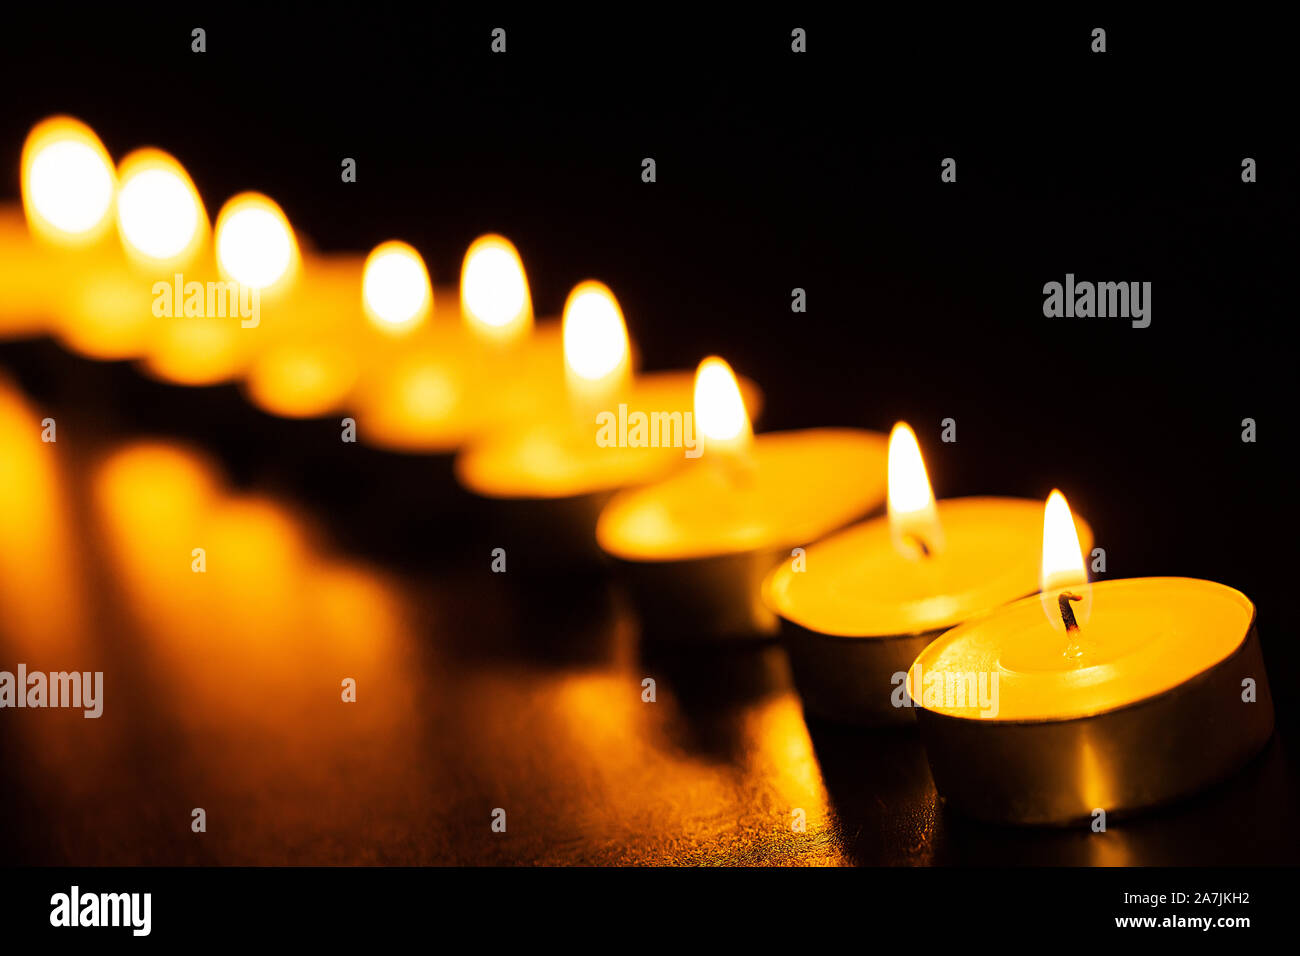 Nobody Shot Candles in-the-night Line of-candles Lighting Illuminated During Diwali Festival Celebration Stock Photo